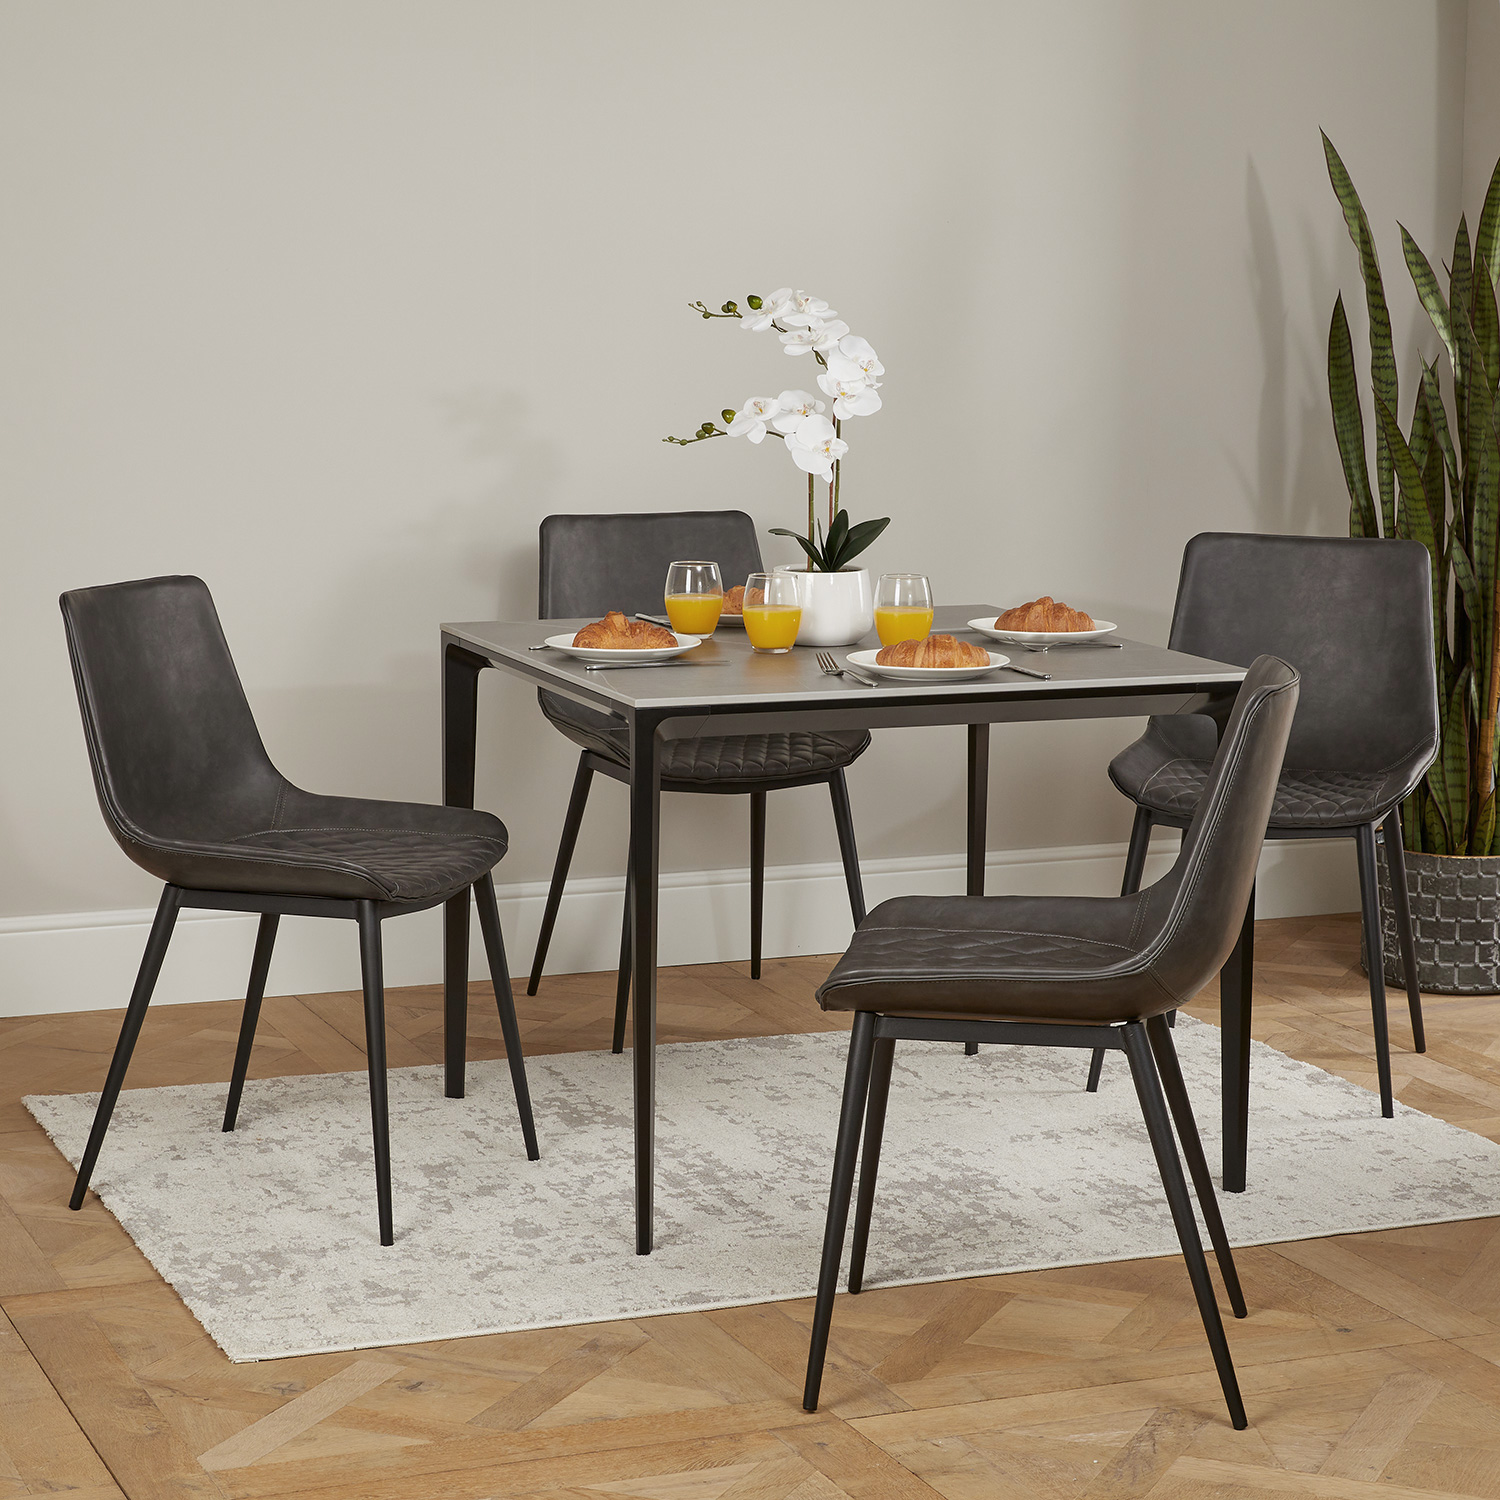 Bellagio 90cm Square Grey Sintered Stone Dining Table with 4 x Leo Grey Dining Chairs